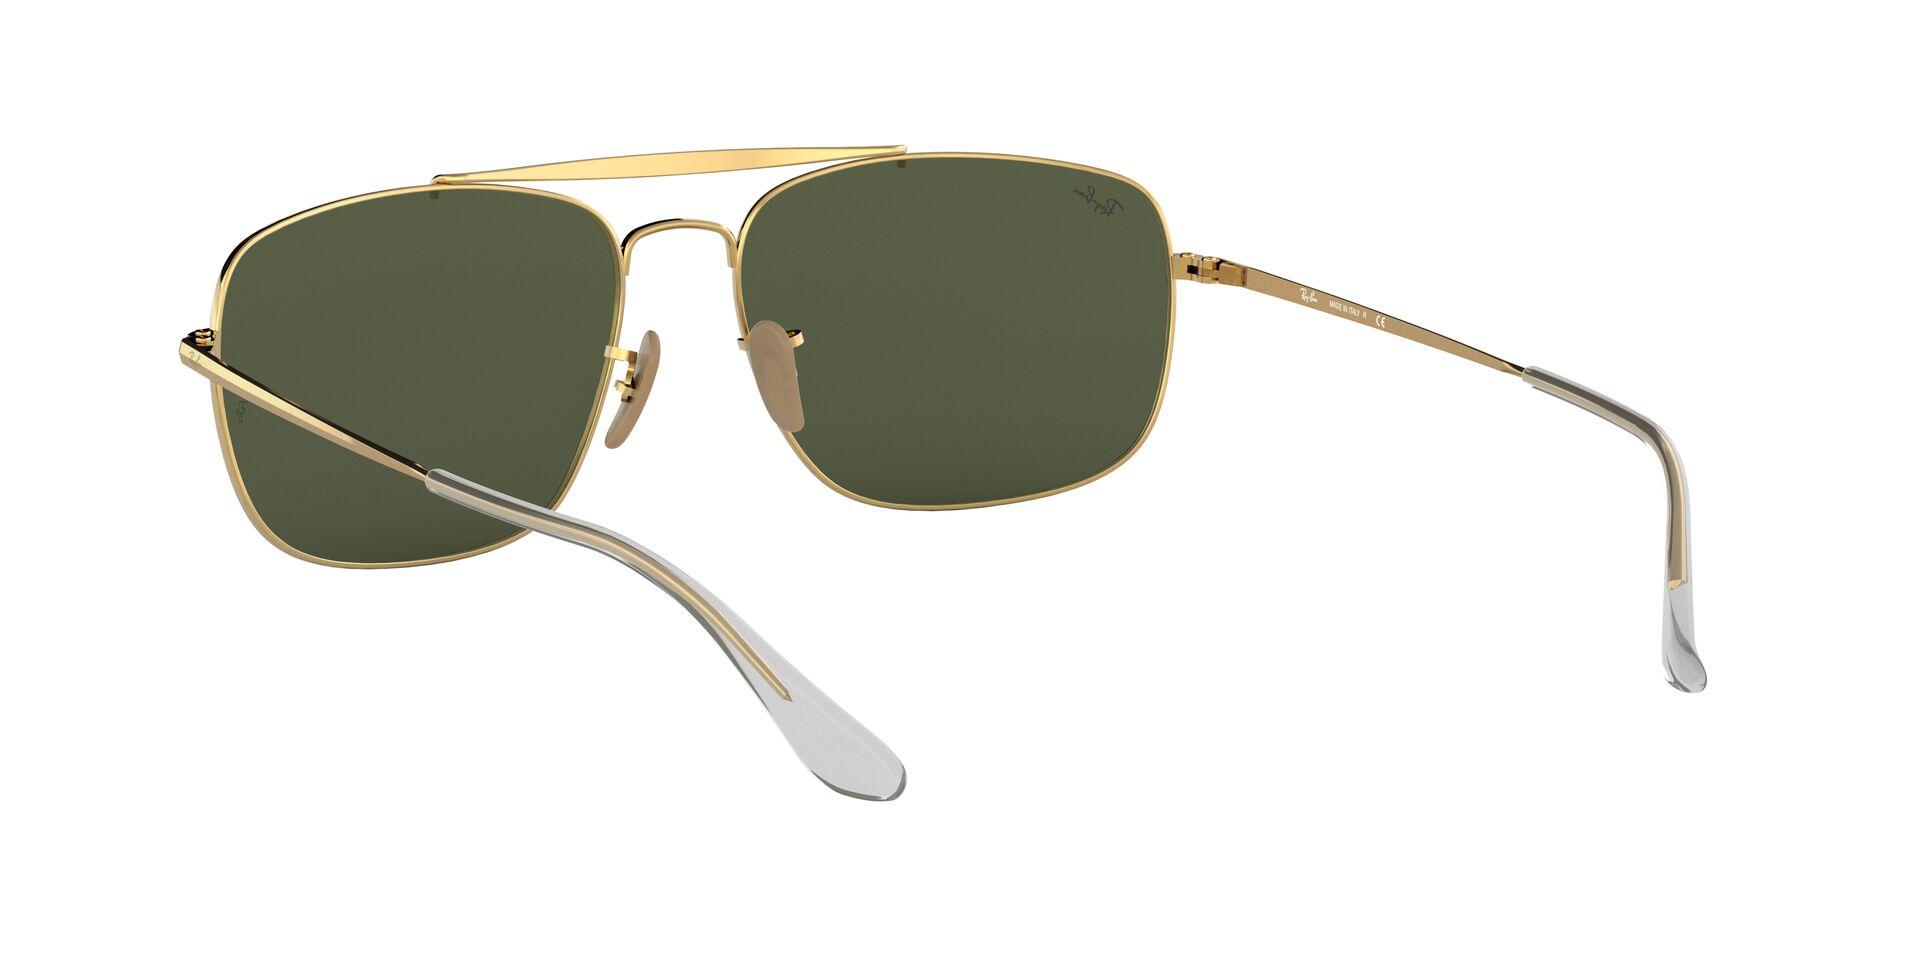 Mắt Kính Ray-Ban The Colonel - RB3560 001 -Sunglasses